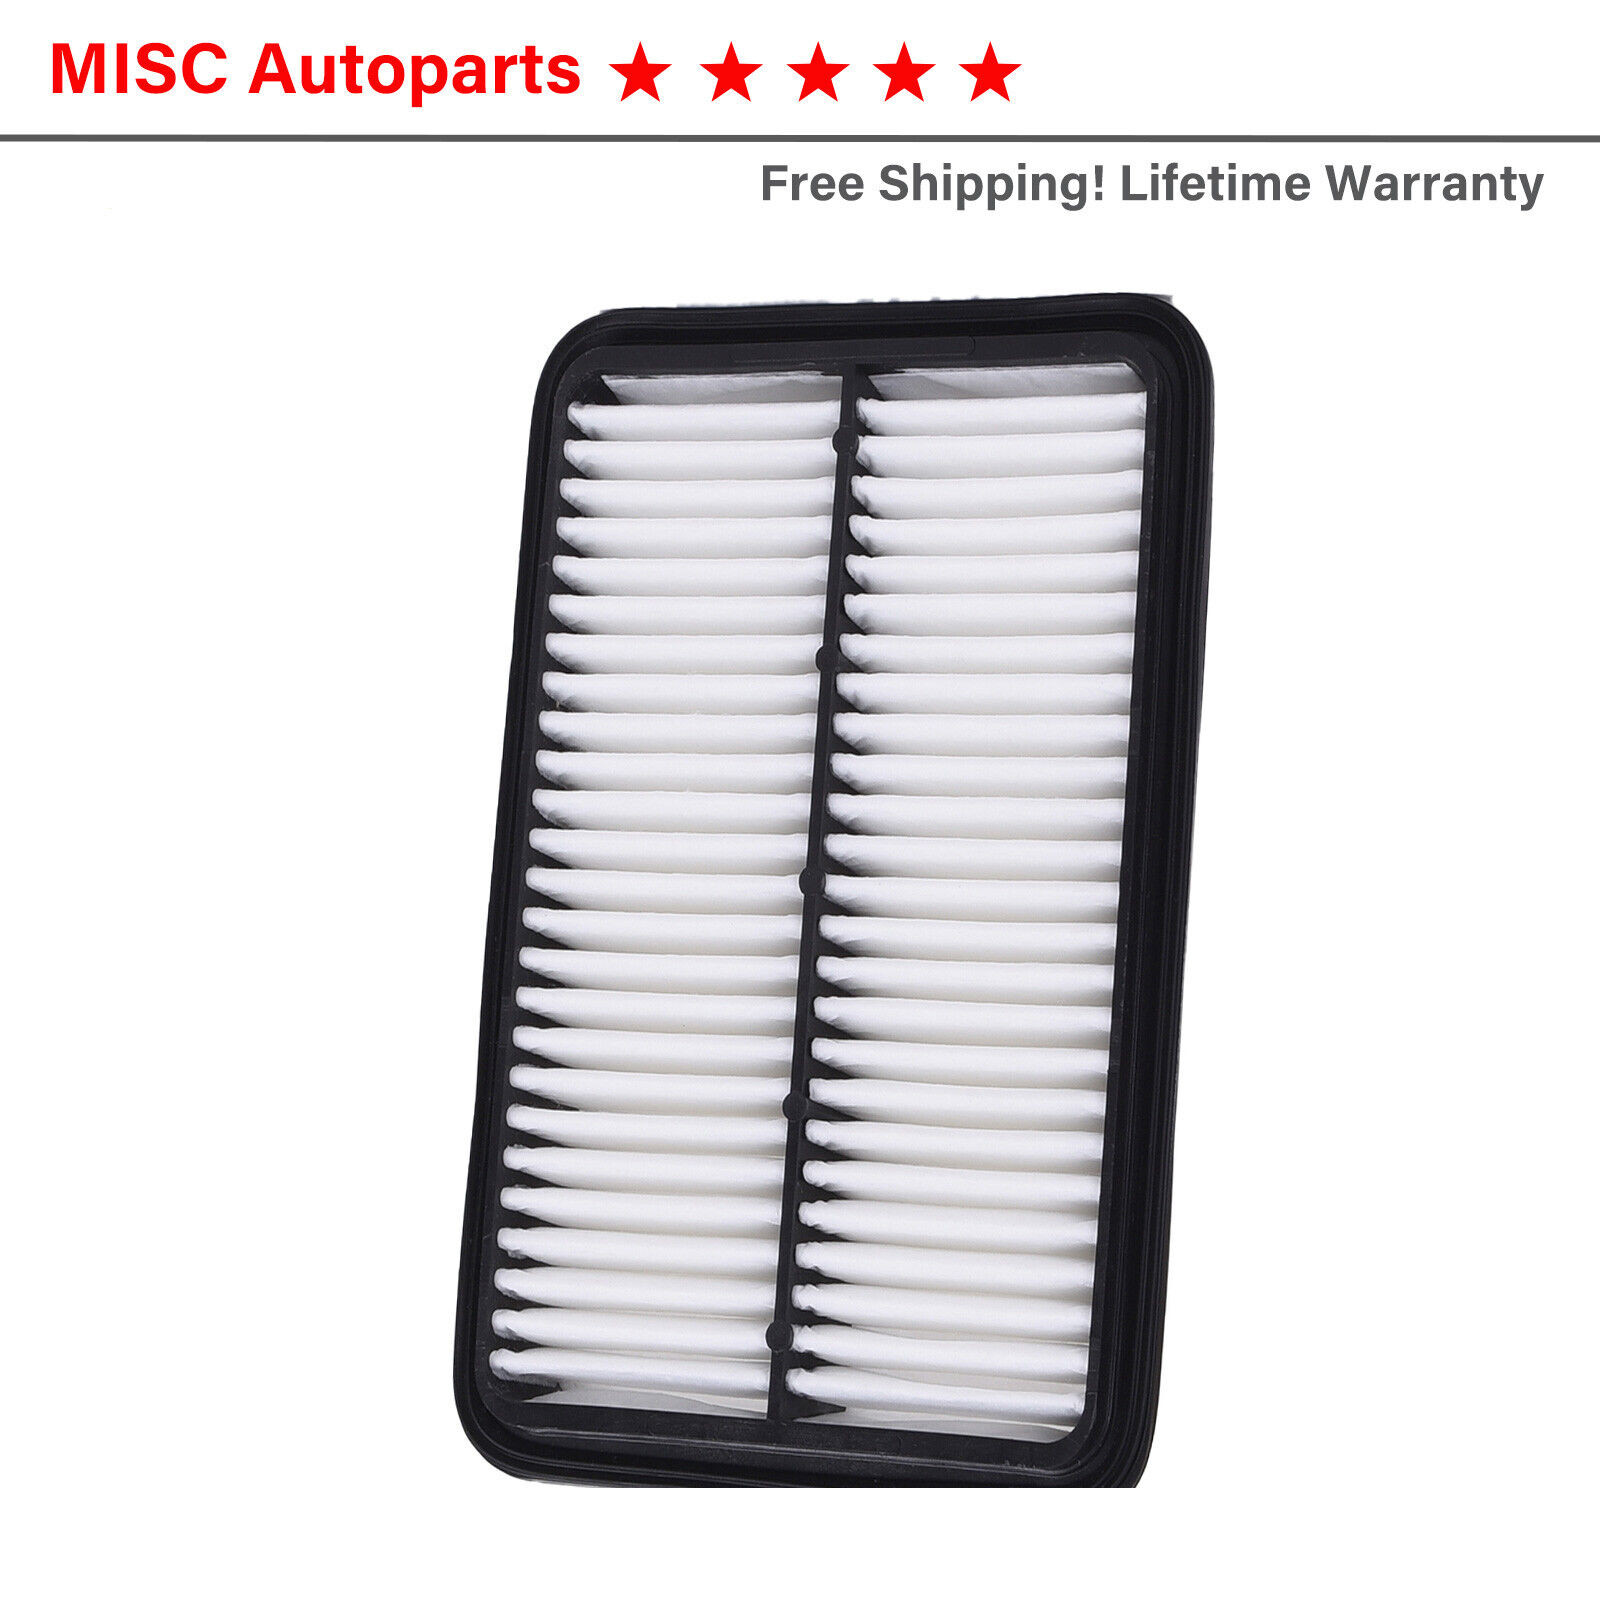 Engine Air Filter For 1989-2004 Toyota Tacoma 4Runner Previa Geo Storm